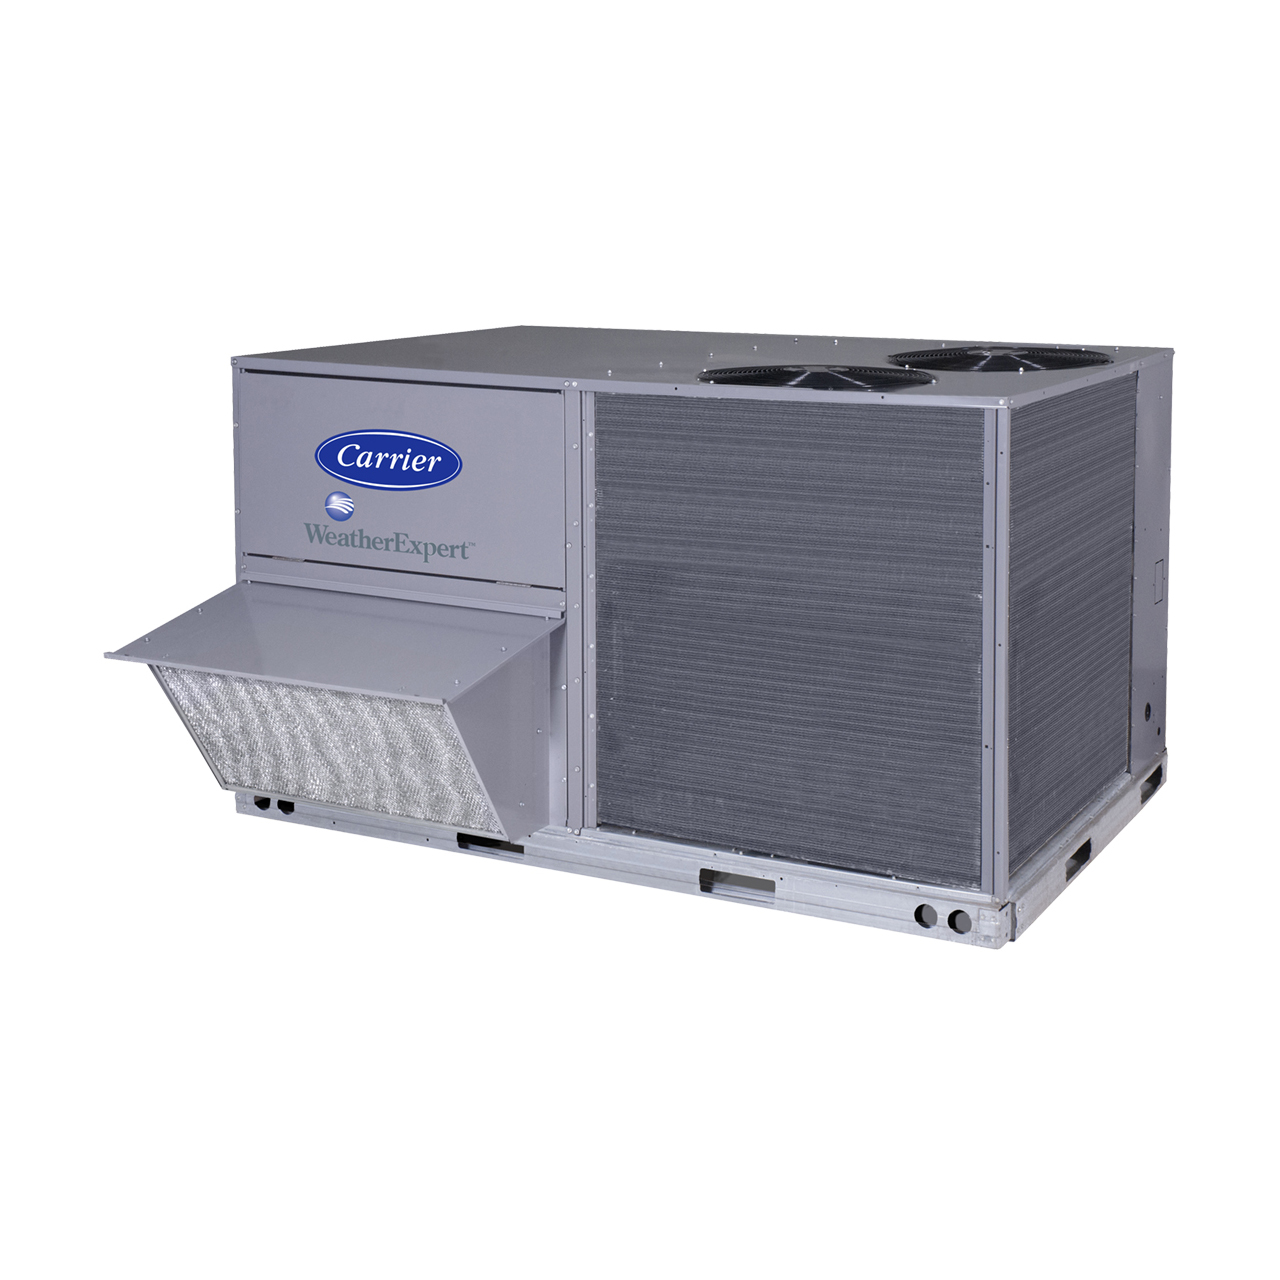 48LC WeatherExpert® rooftop units were designed by customers for customers. They are Carrier’s most efficient commercial packaged rooftop ever produced and have some of the industry’s highest IEER’s available. 